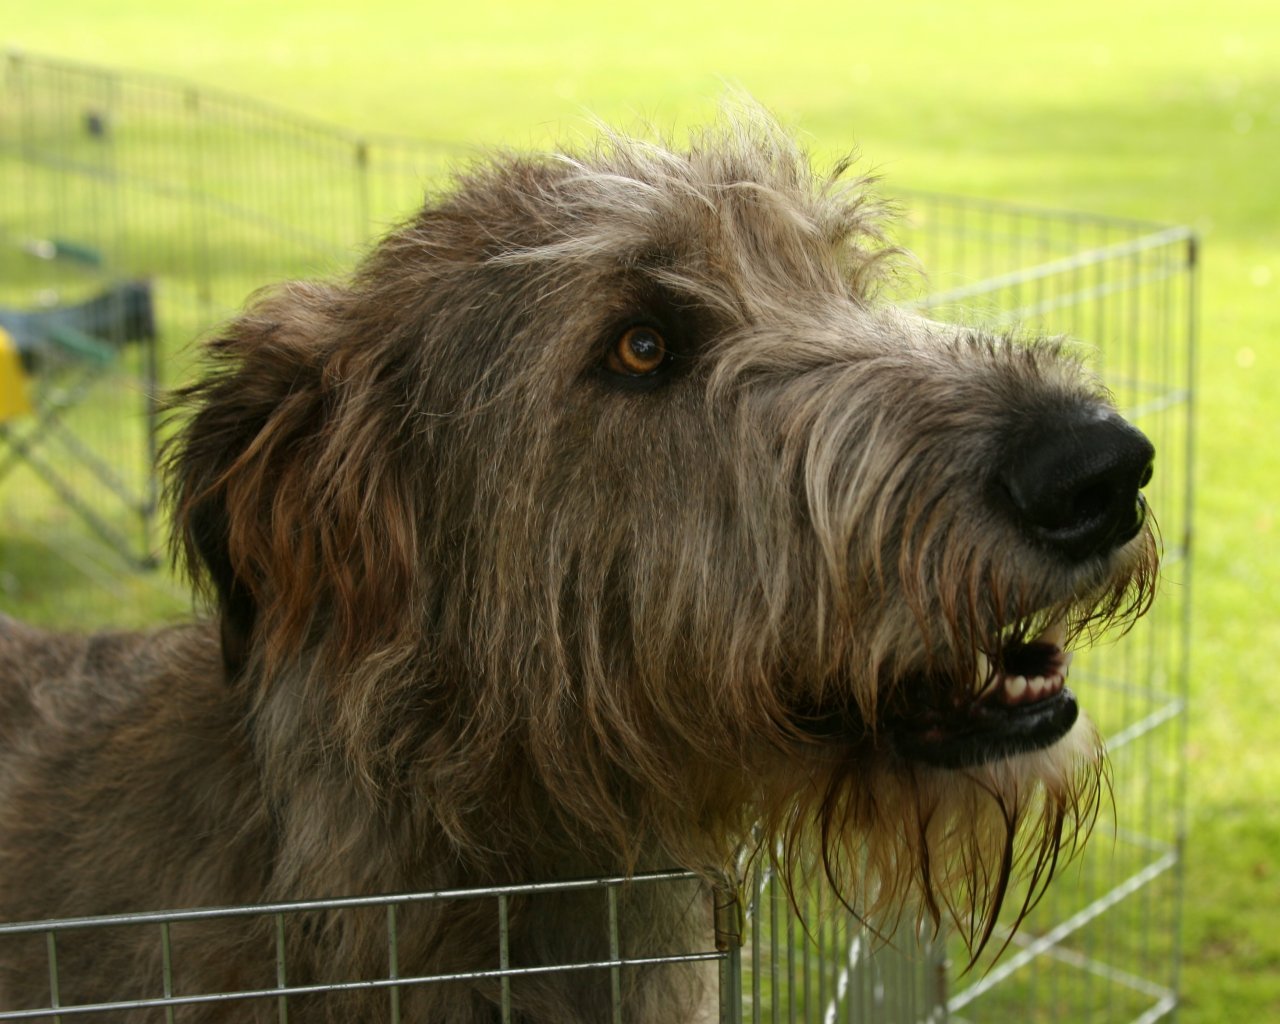 The Irish Wolfhounds are sight hounds with high prey drive. That means, they will chase animals, and even cars and bikes. So if he gets away,… good luck ...